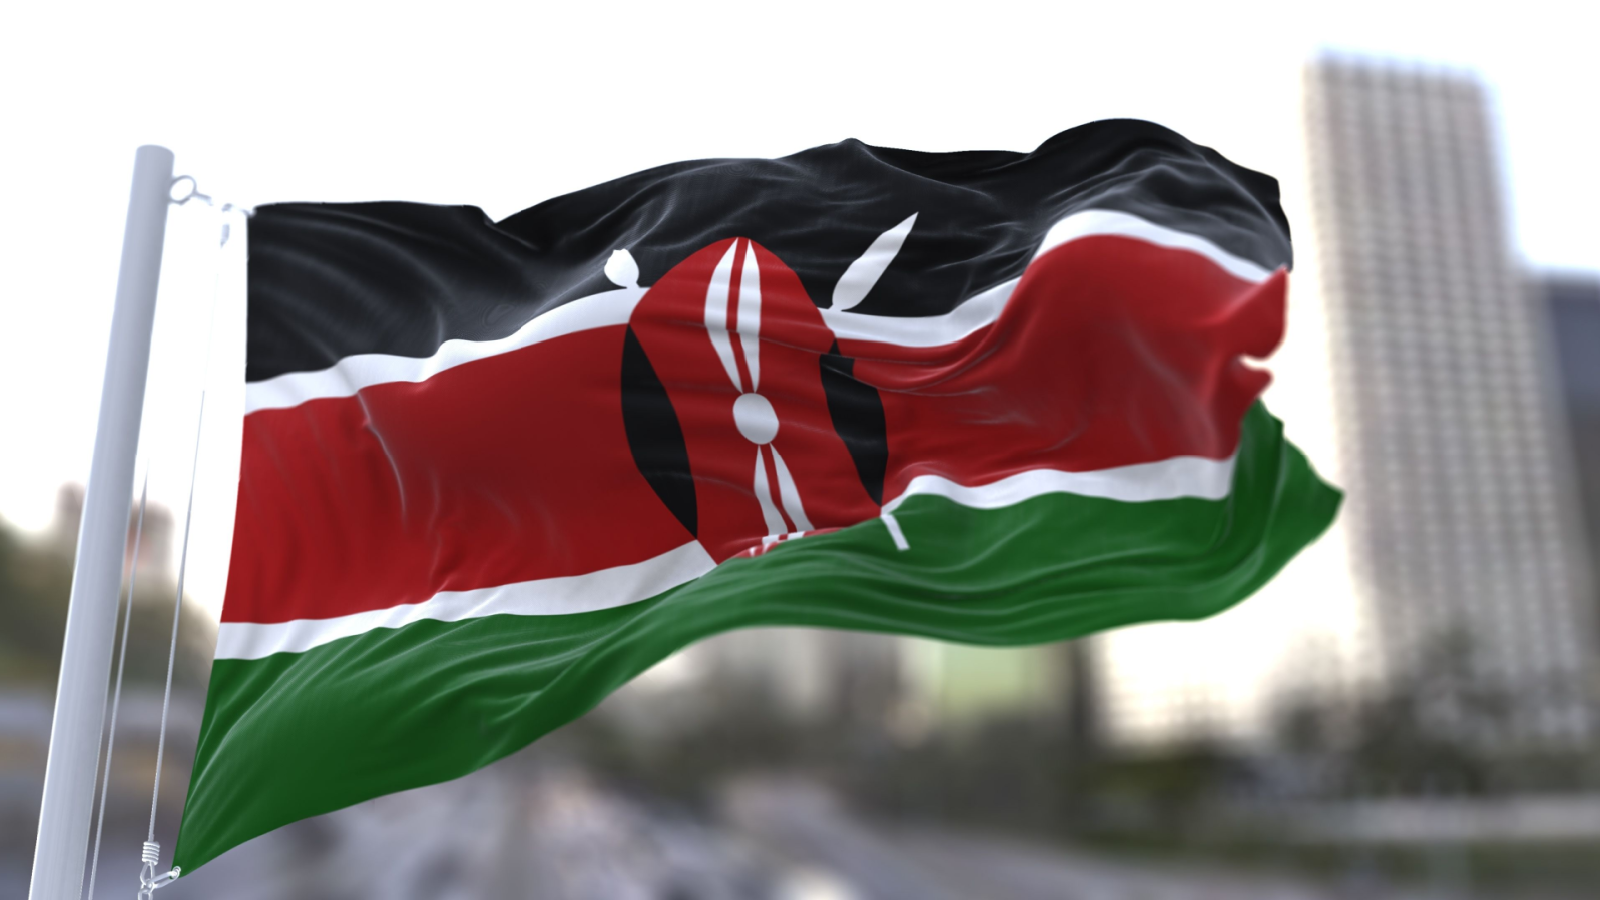 Kenya Protest Leaders See Crypto as Alternative to Unfair System